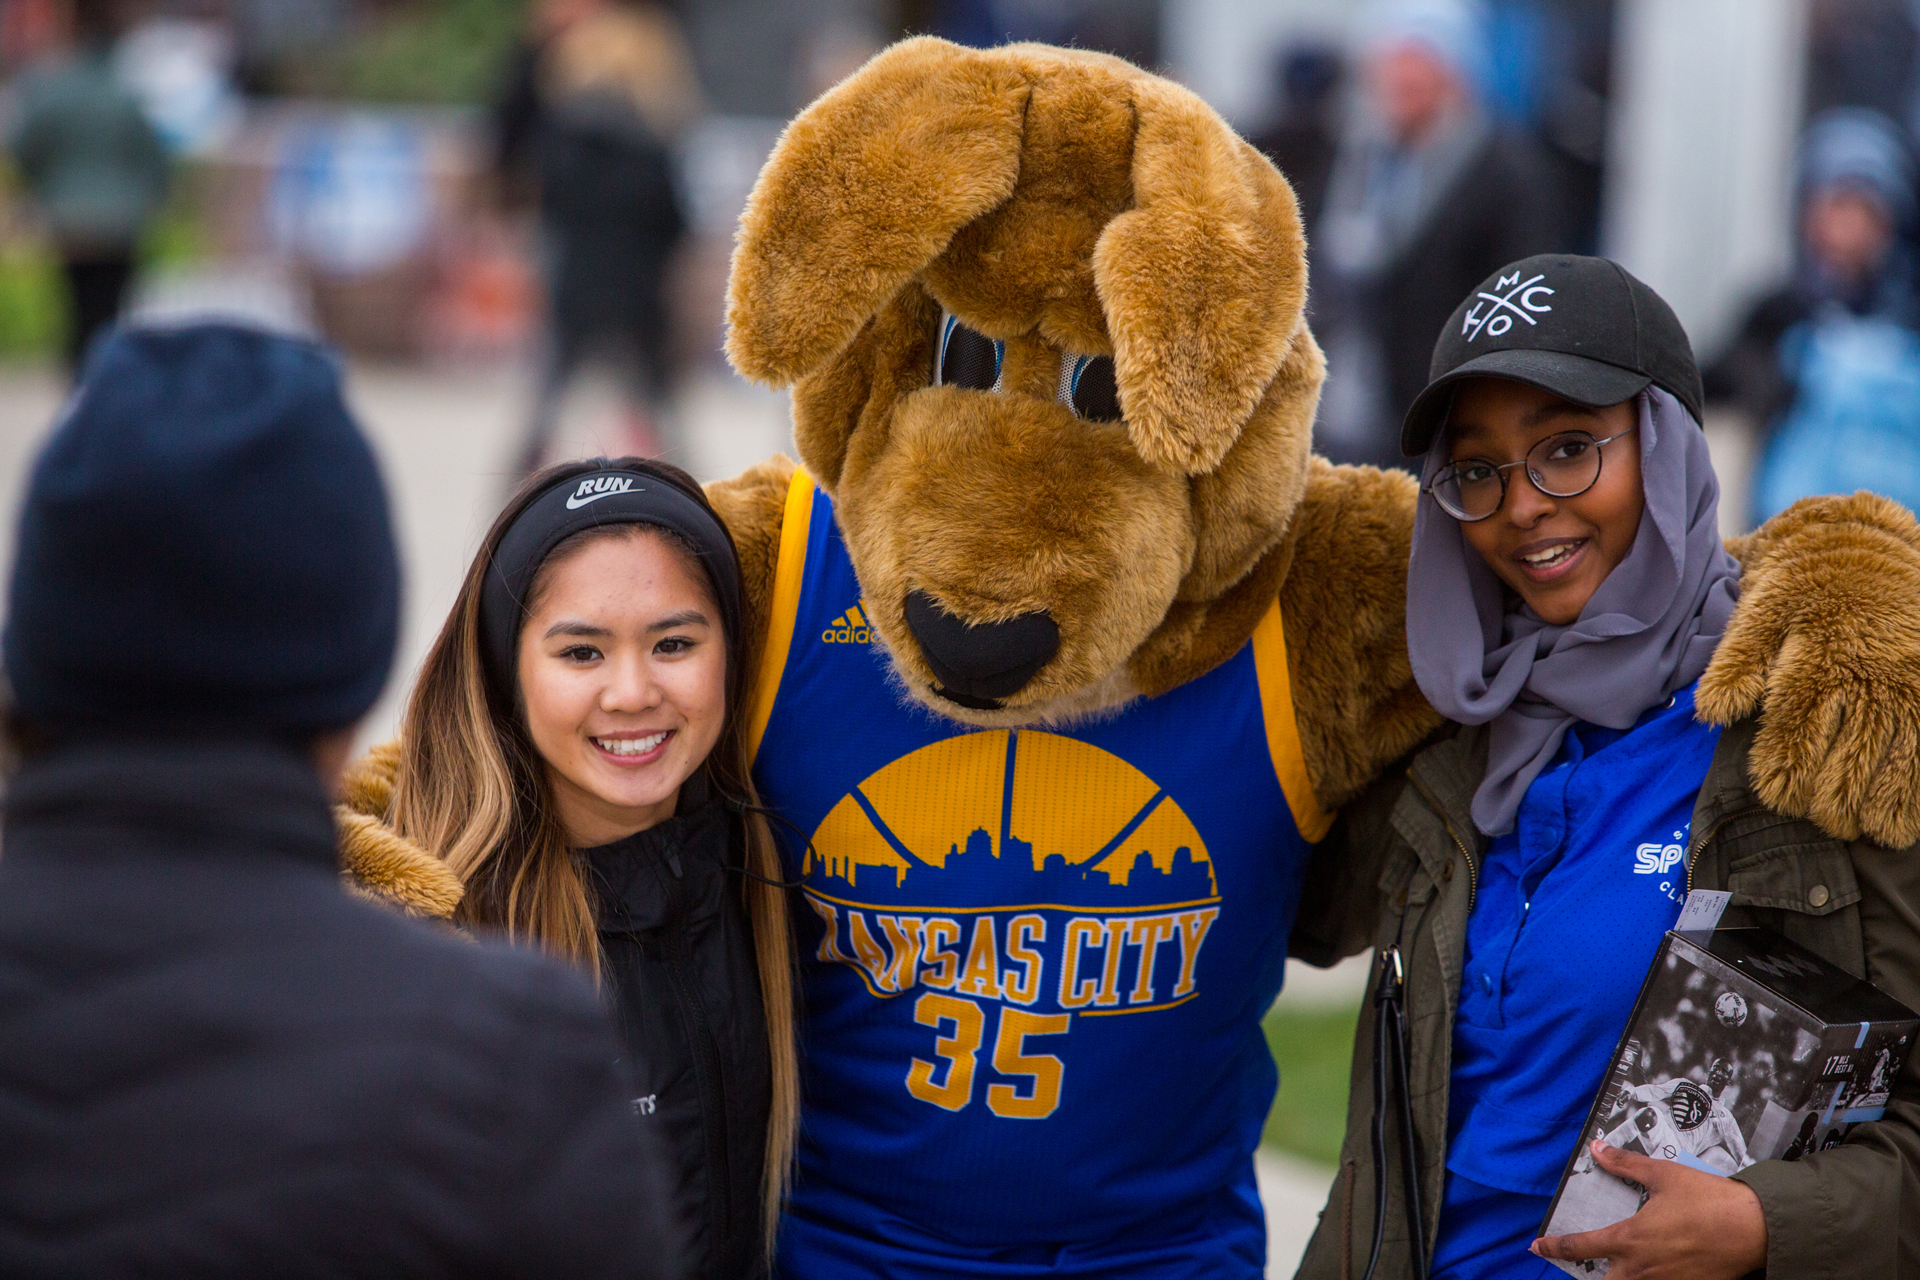 UMKC mascot Kasey Roo stands between two female students, one presenting as white and one wearing a hijab under her hat